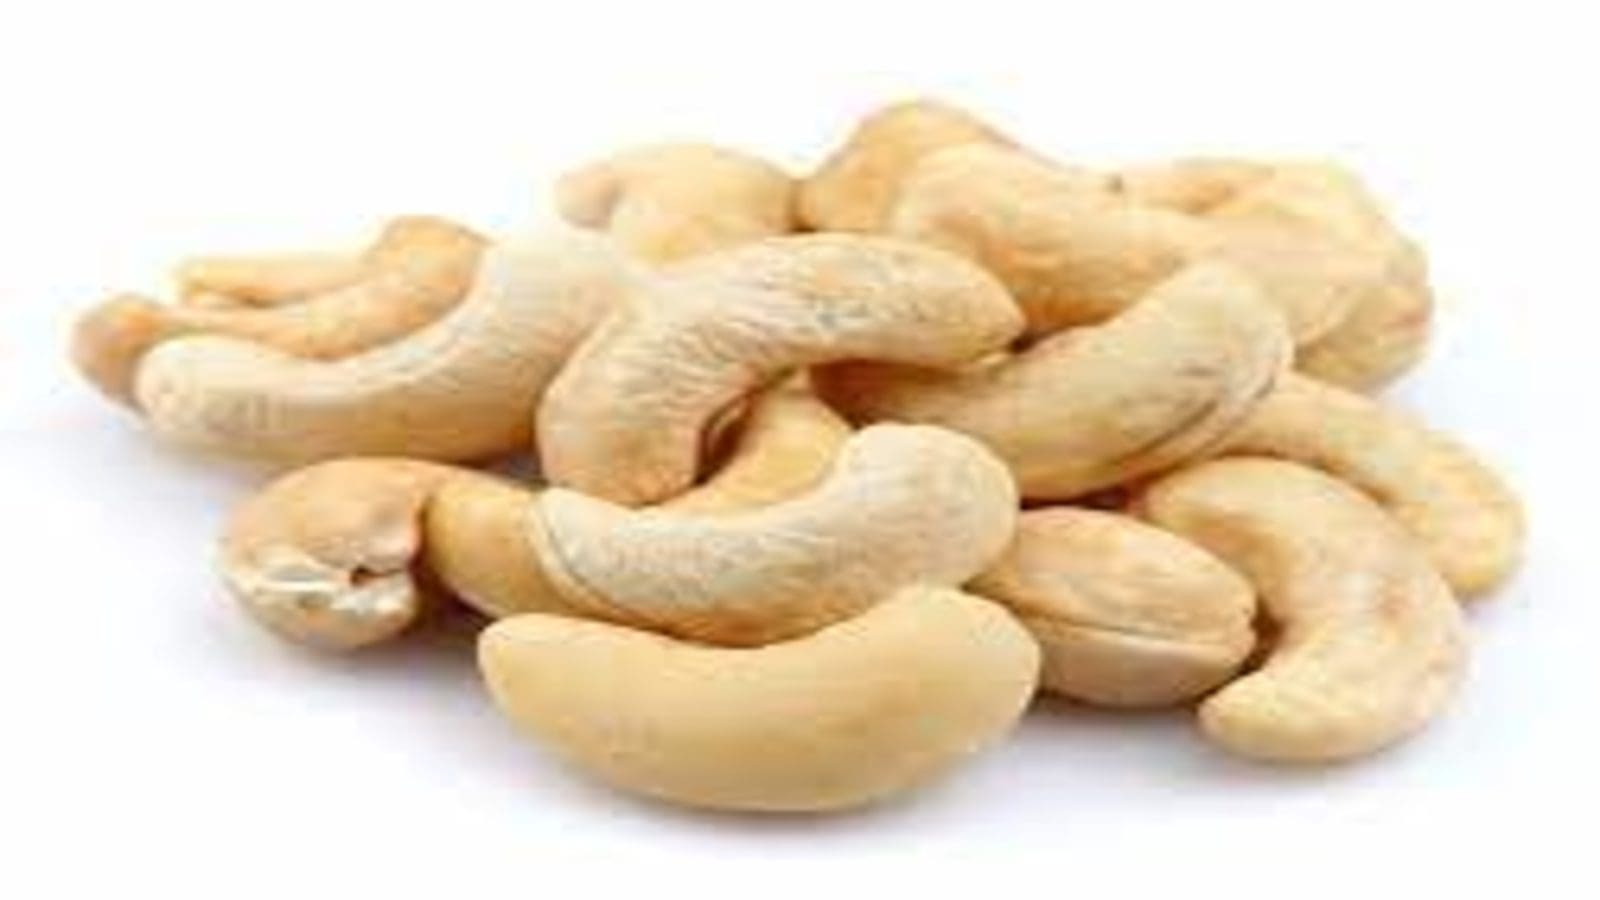 Tanzania to build a US$116M industrial park to boost cashew nut processing